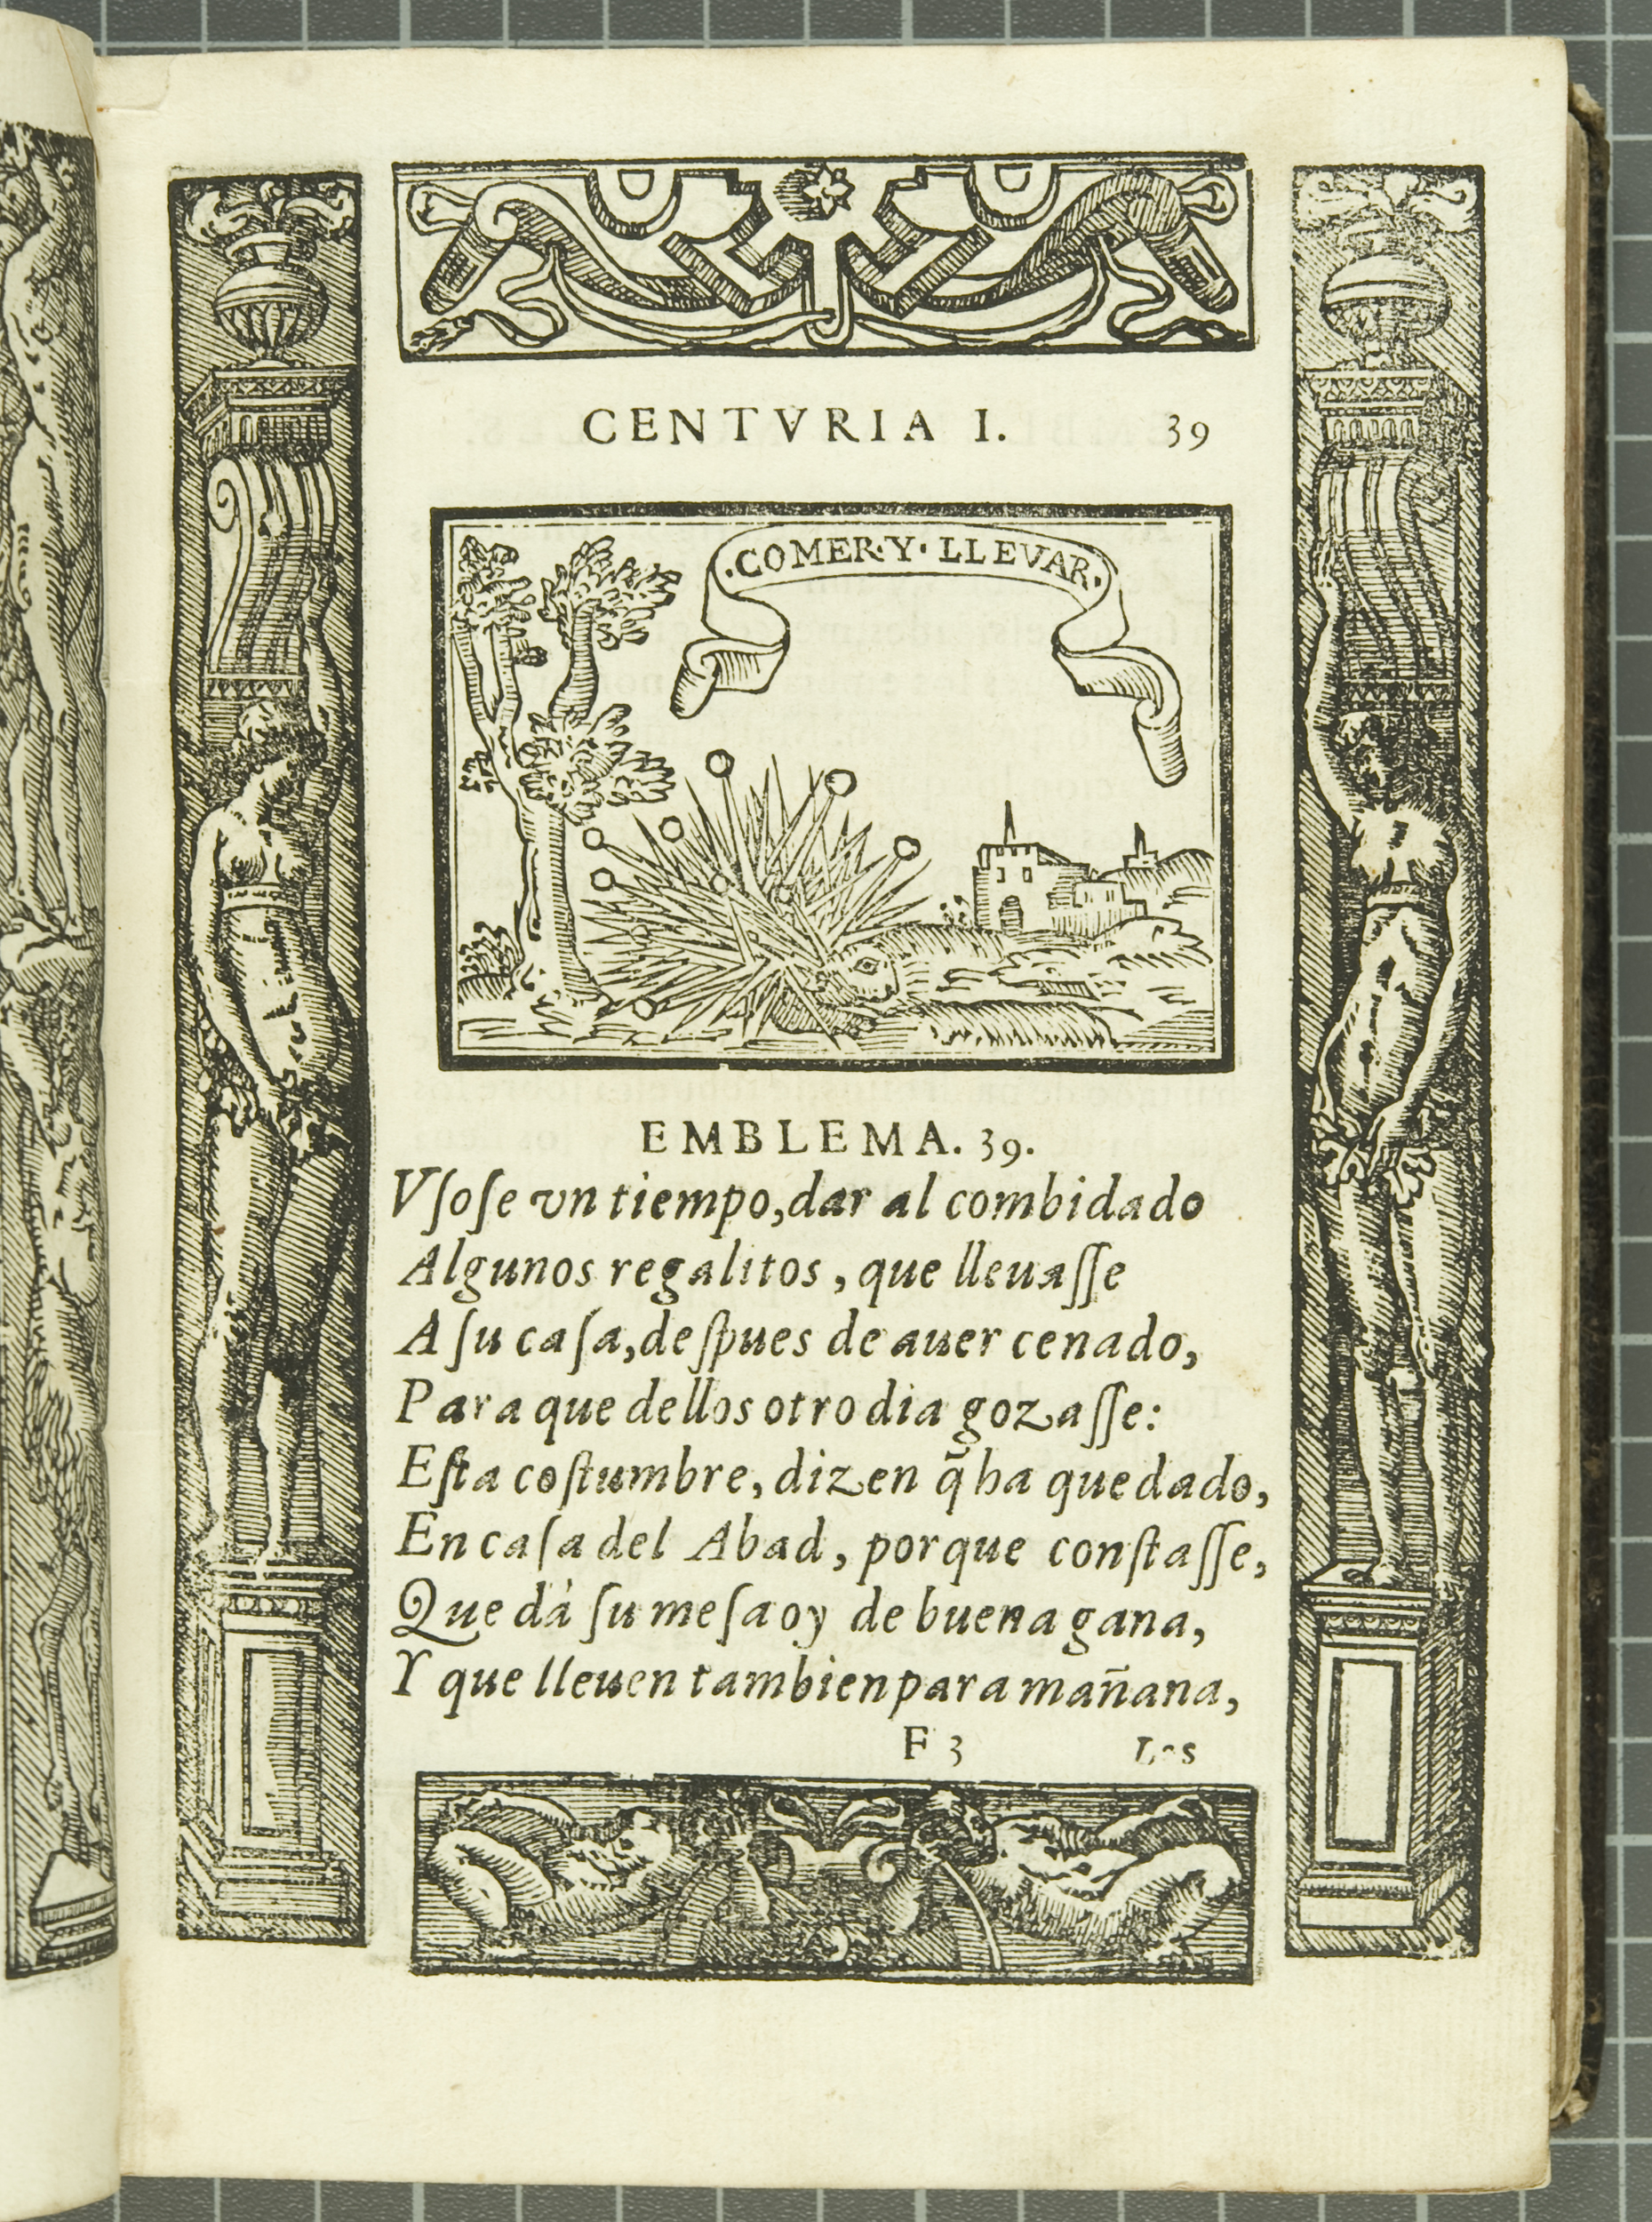 Emblem 39: "Comer y llevar" (Eat and carry away), from Covarrubias’s Emblemas morales (1610).